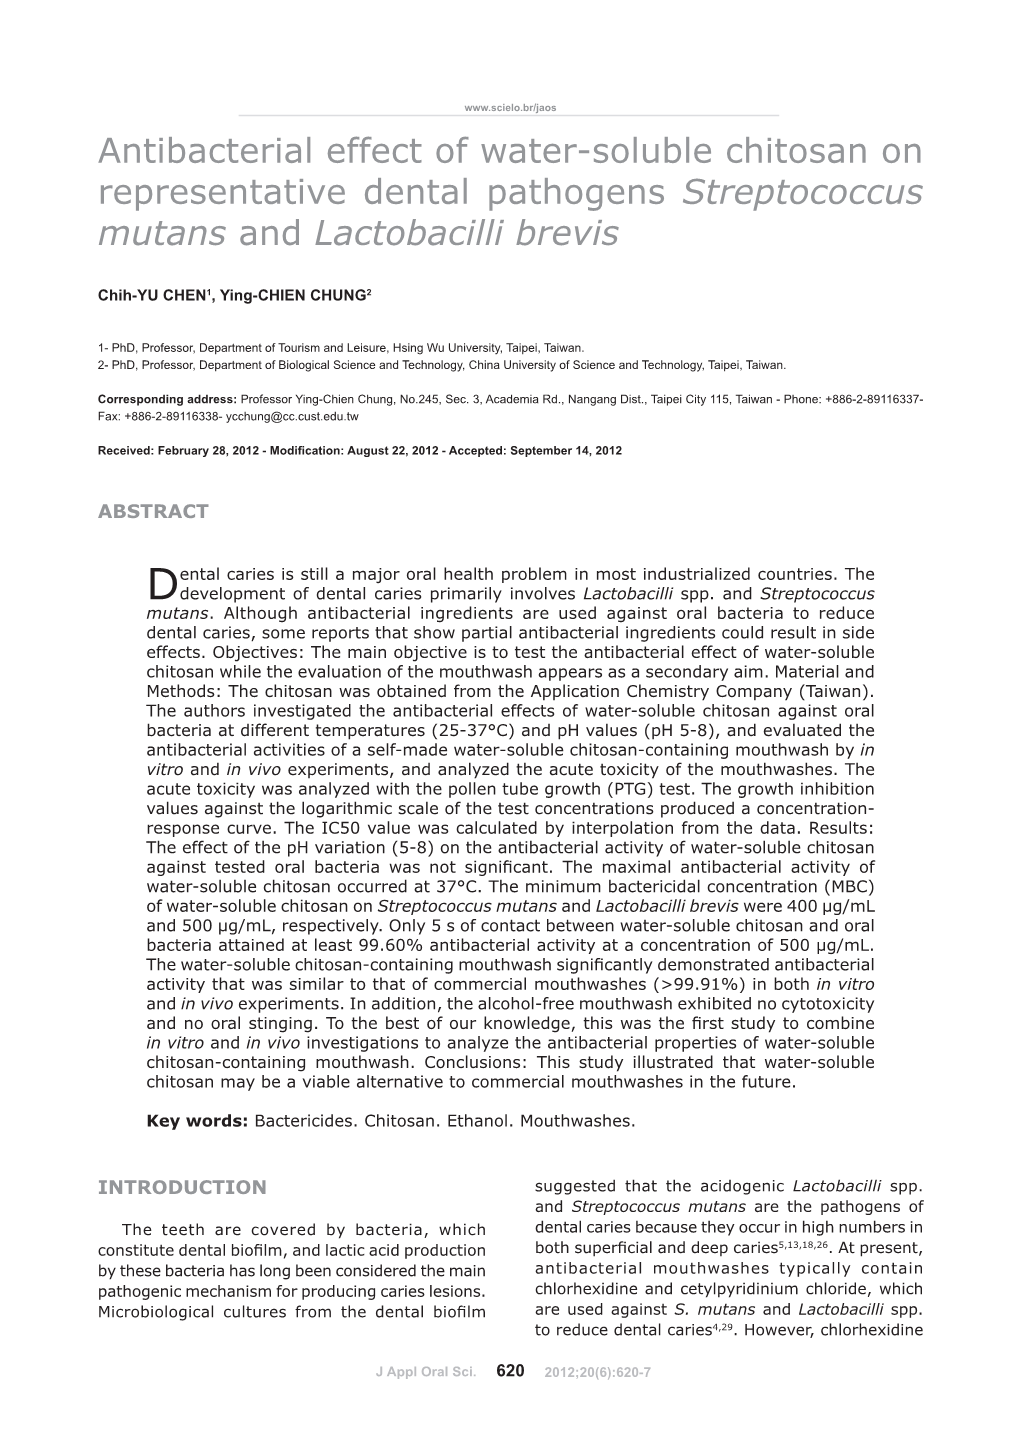 Antibacterial Effect of Water-Soluble Chitosan on Representative Dental Pathogens Streptococcus Mutans and Lactobacilli Brevis